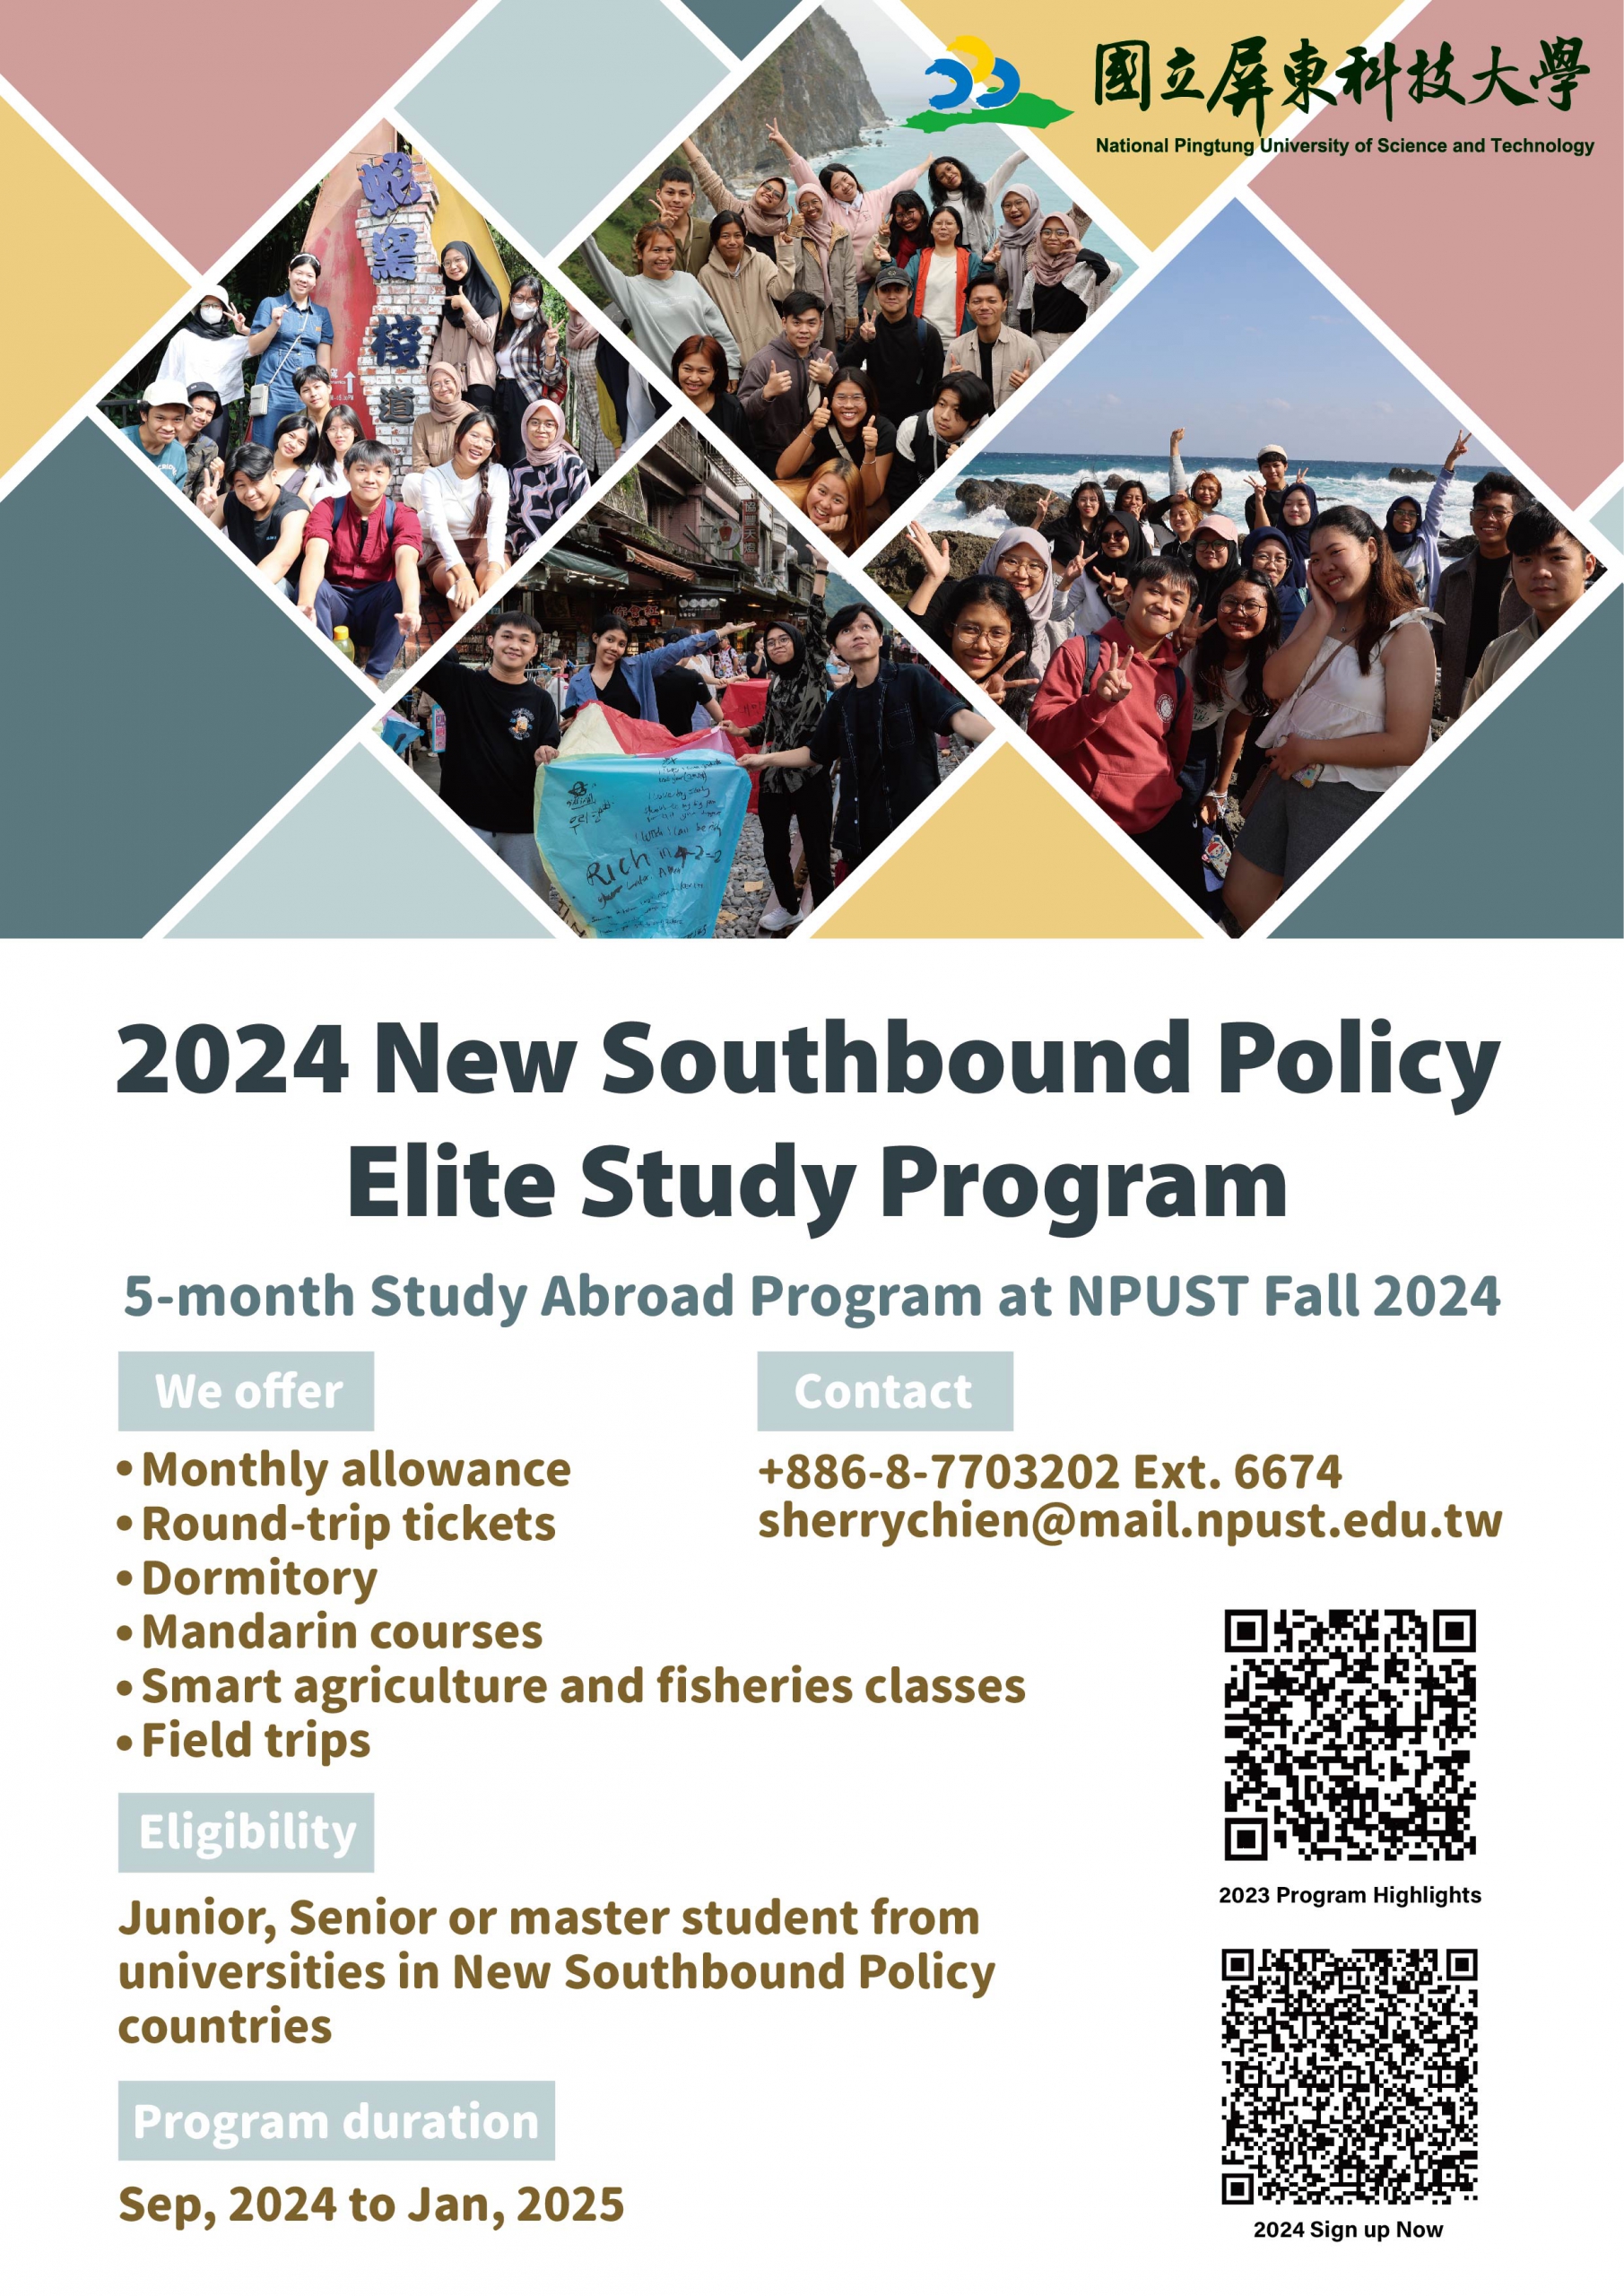 【2024.6.18】”2024 New Southbound Policy Elite Study Program” — National Pingtung University of Science and Technology (NPUST)